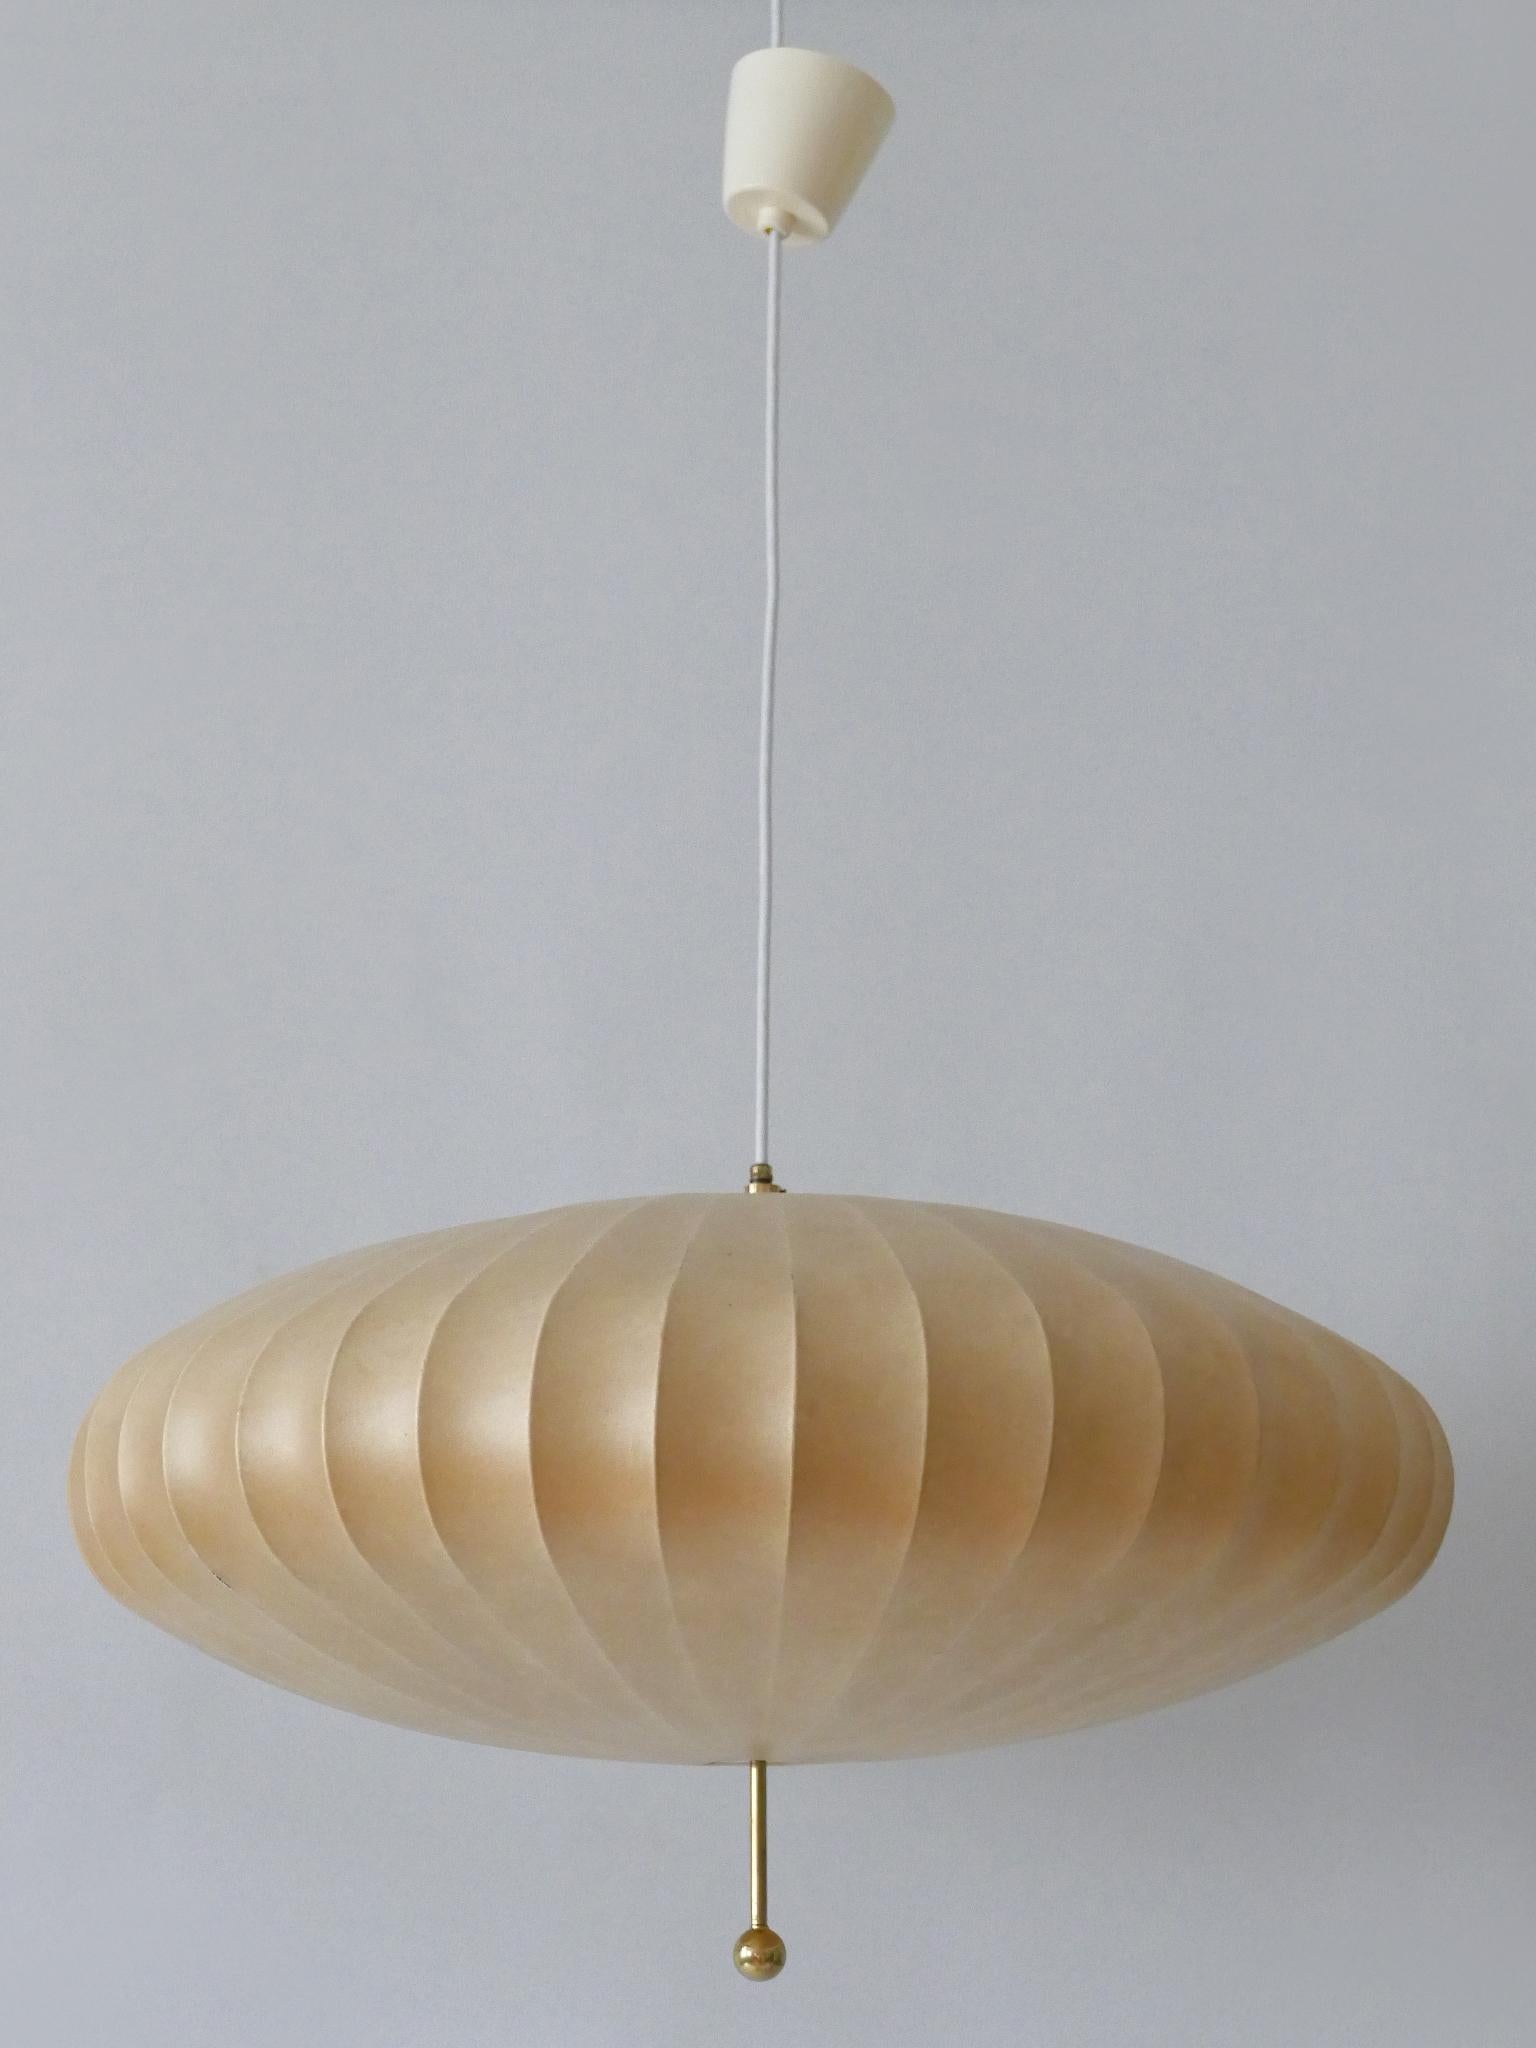 Large Mid-Century Modern Cocoon Pendant Lamp or Hanging Light by Goldkant 1960s 3